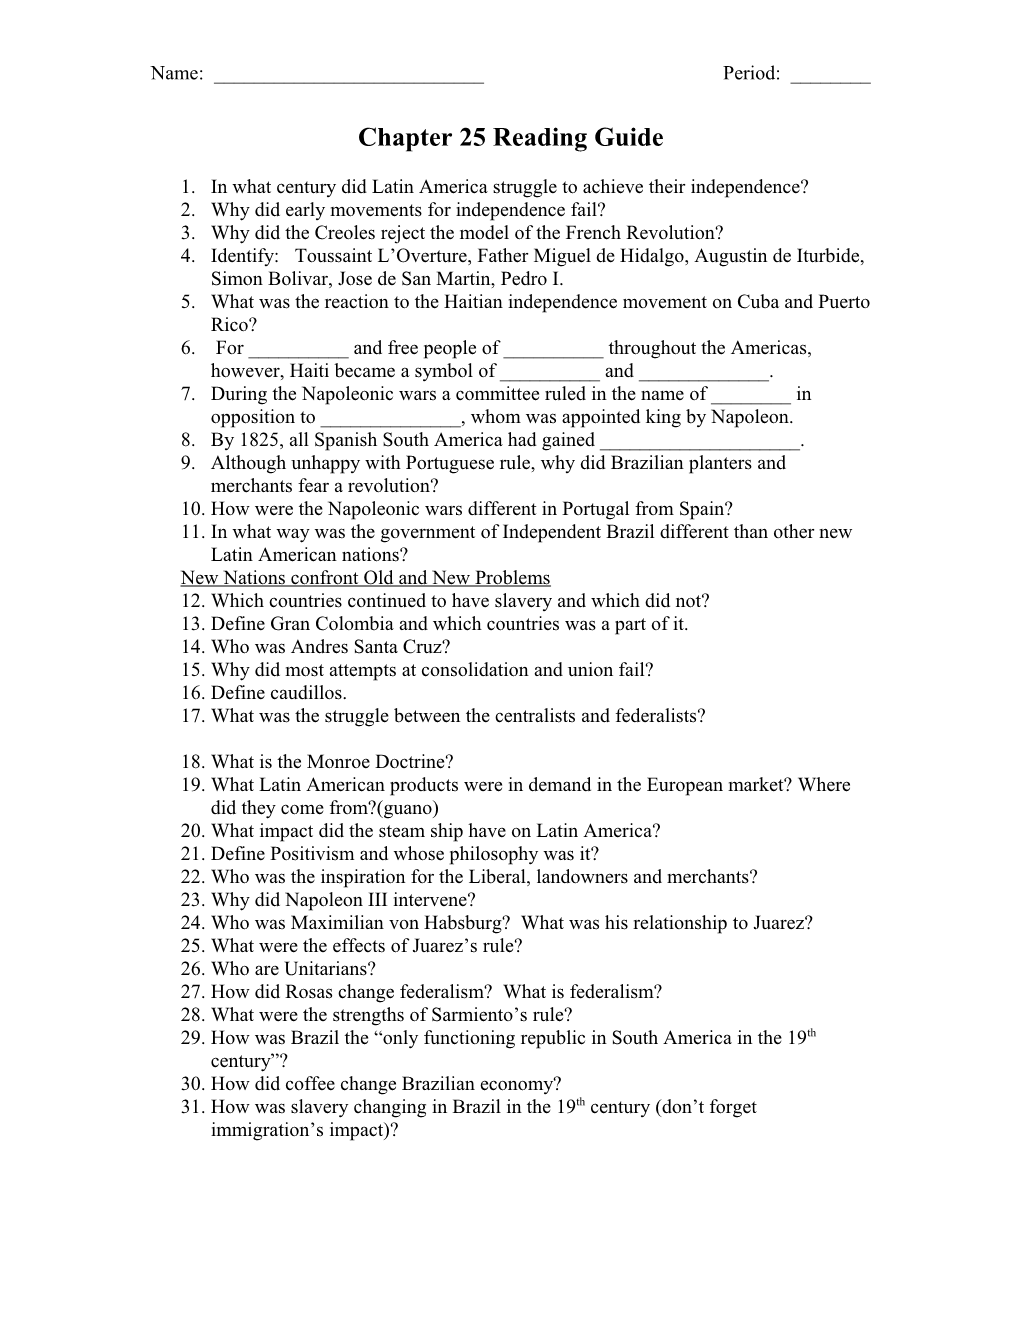 Chapter 25 Guided Reading Questions